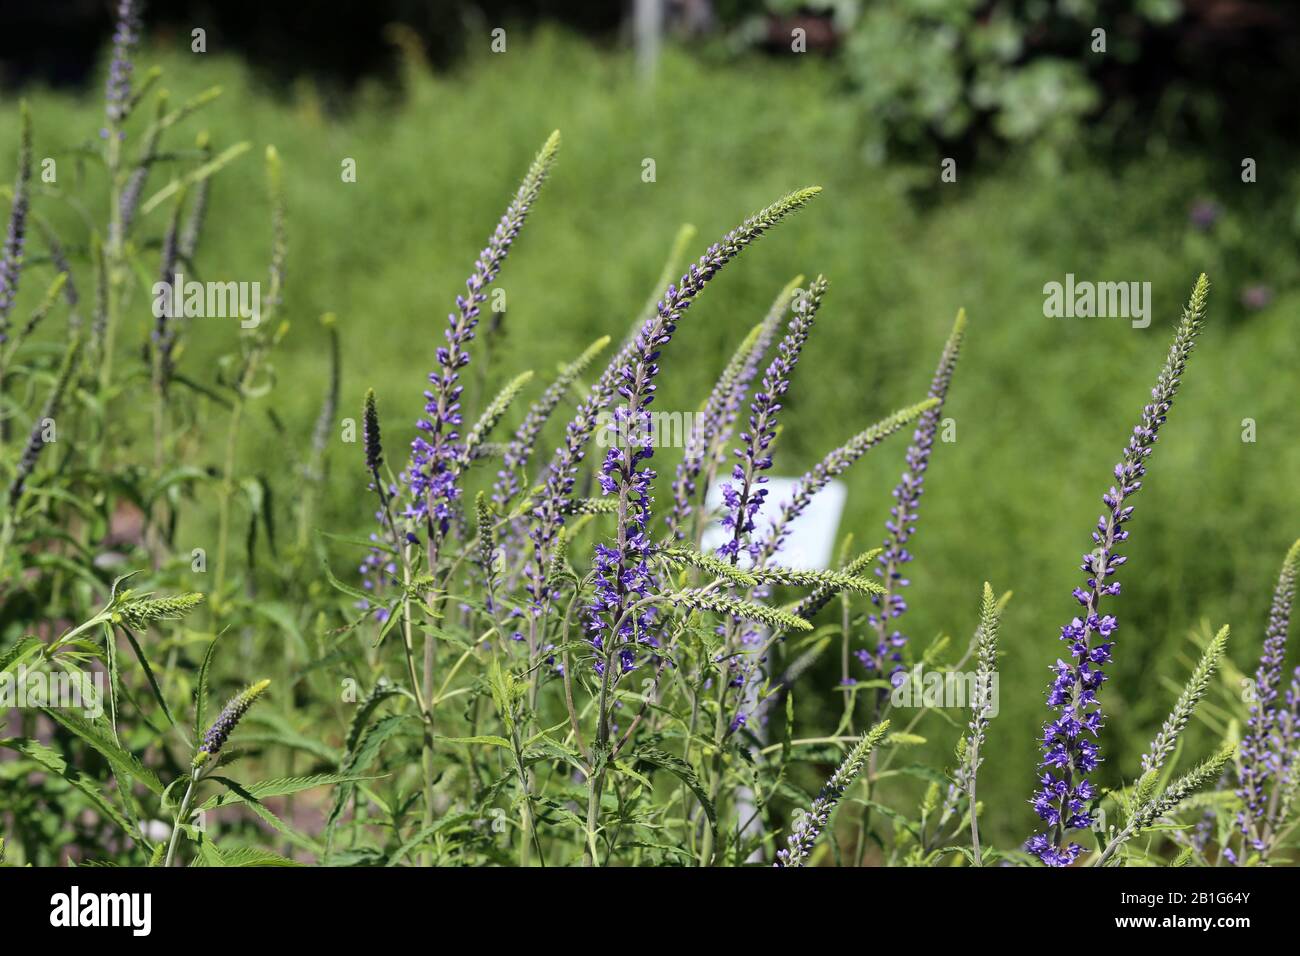 Flower field full of purple sage (salvia) flowers. Blooming flowers during a spring day. in the background there is green grass. Closeup color photo. Stock Photo